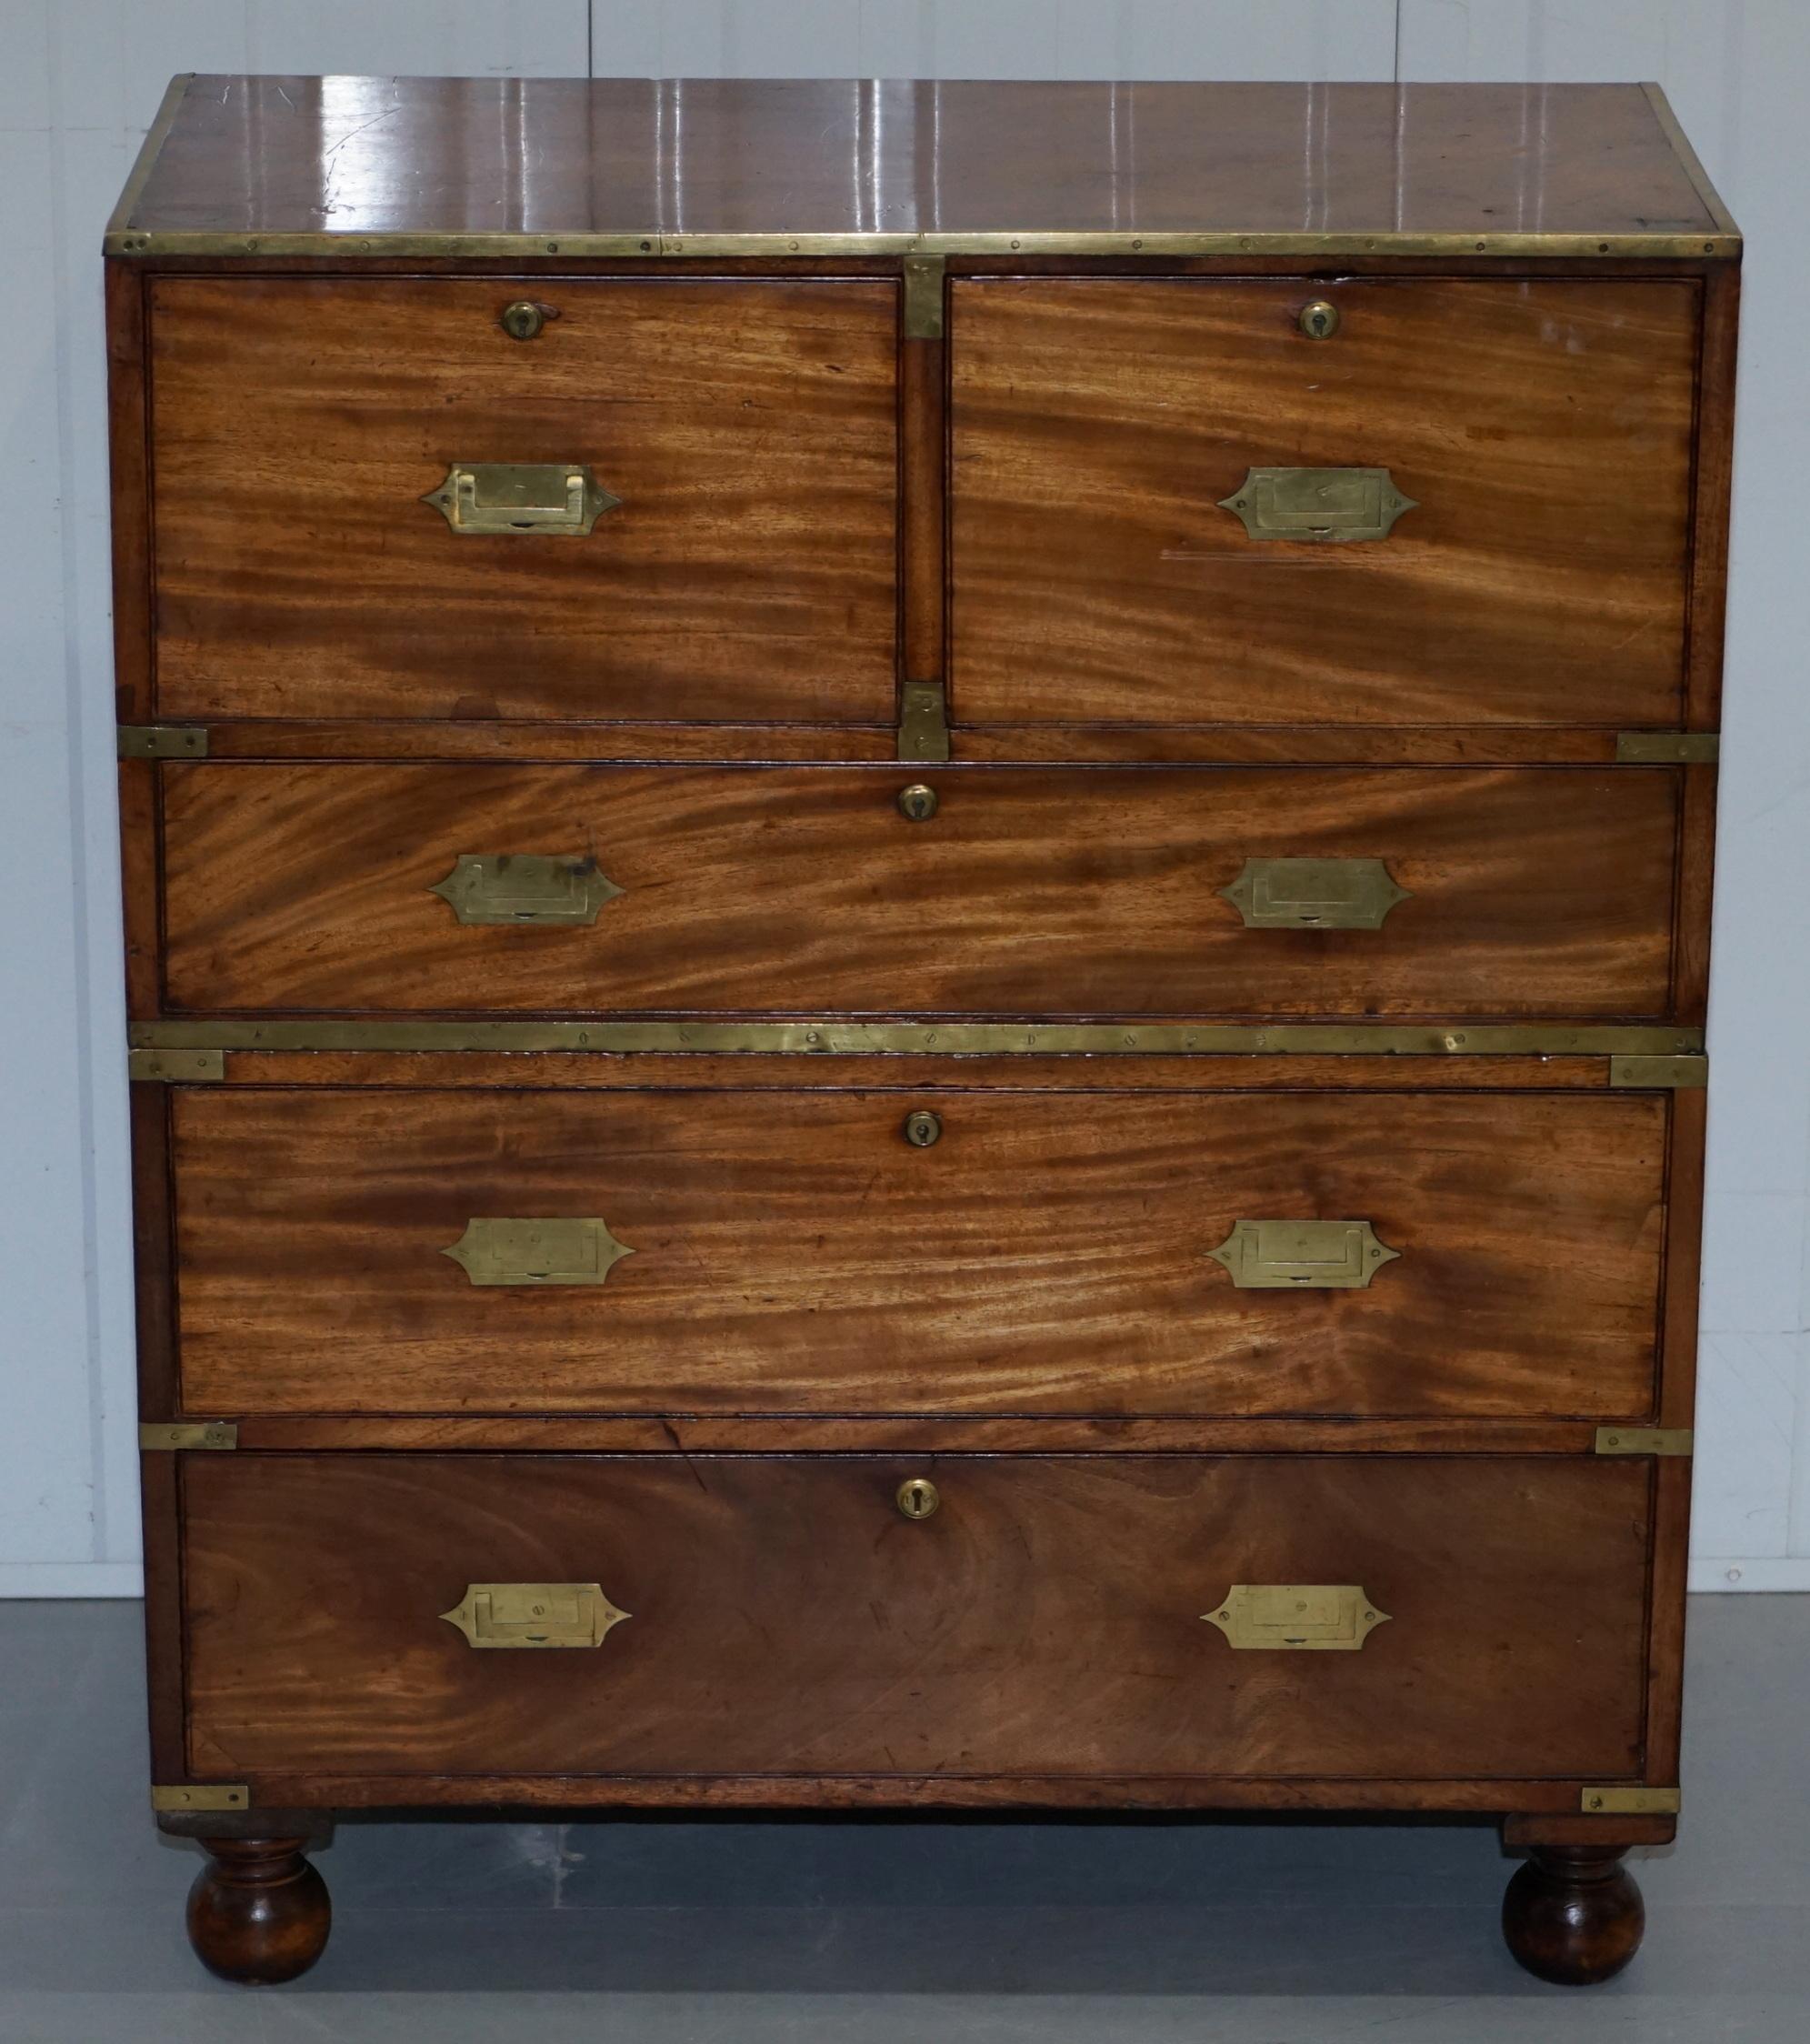 We are delighted to offer for sale lovely very rare solid Walnut with brass trim Military officers campaign chest of drawers, circa 1870 

A genuine and very well used old set of campaign drawers, these unlike most of the fake reproduction pieces